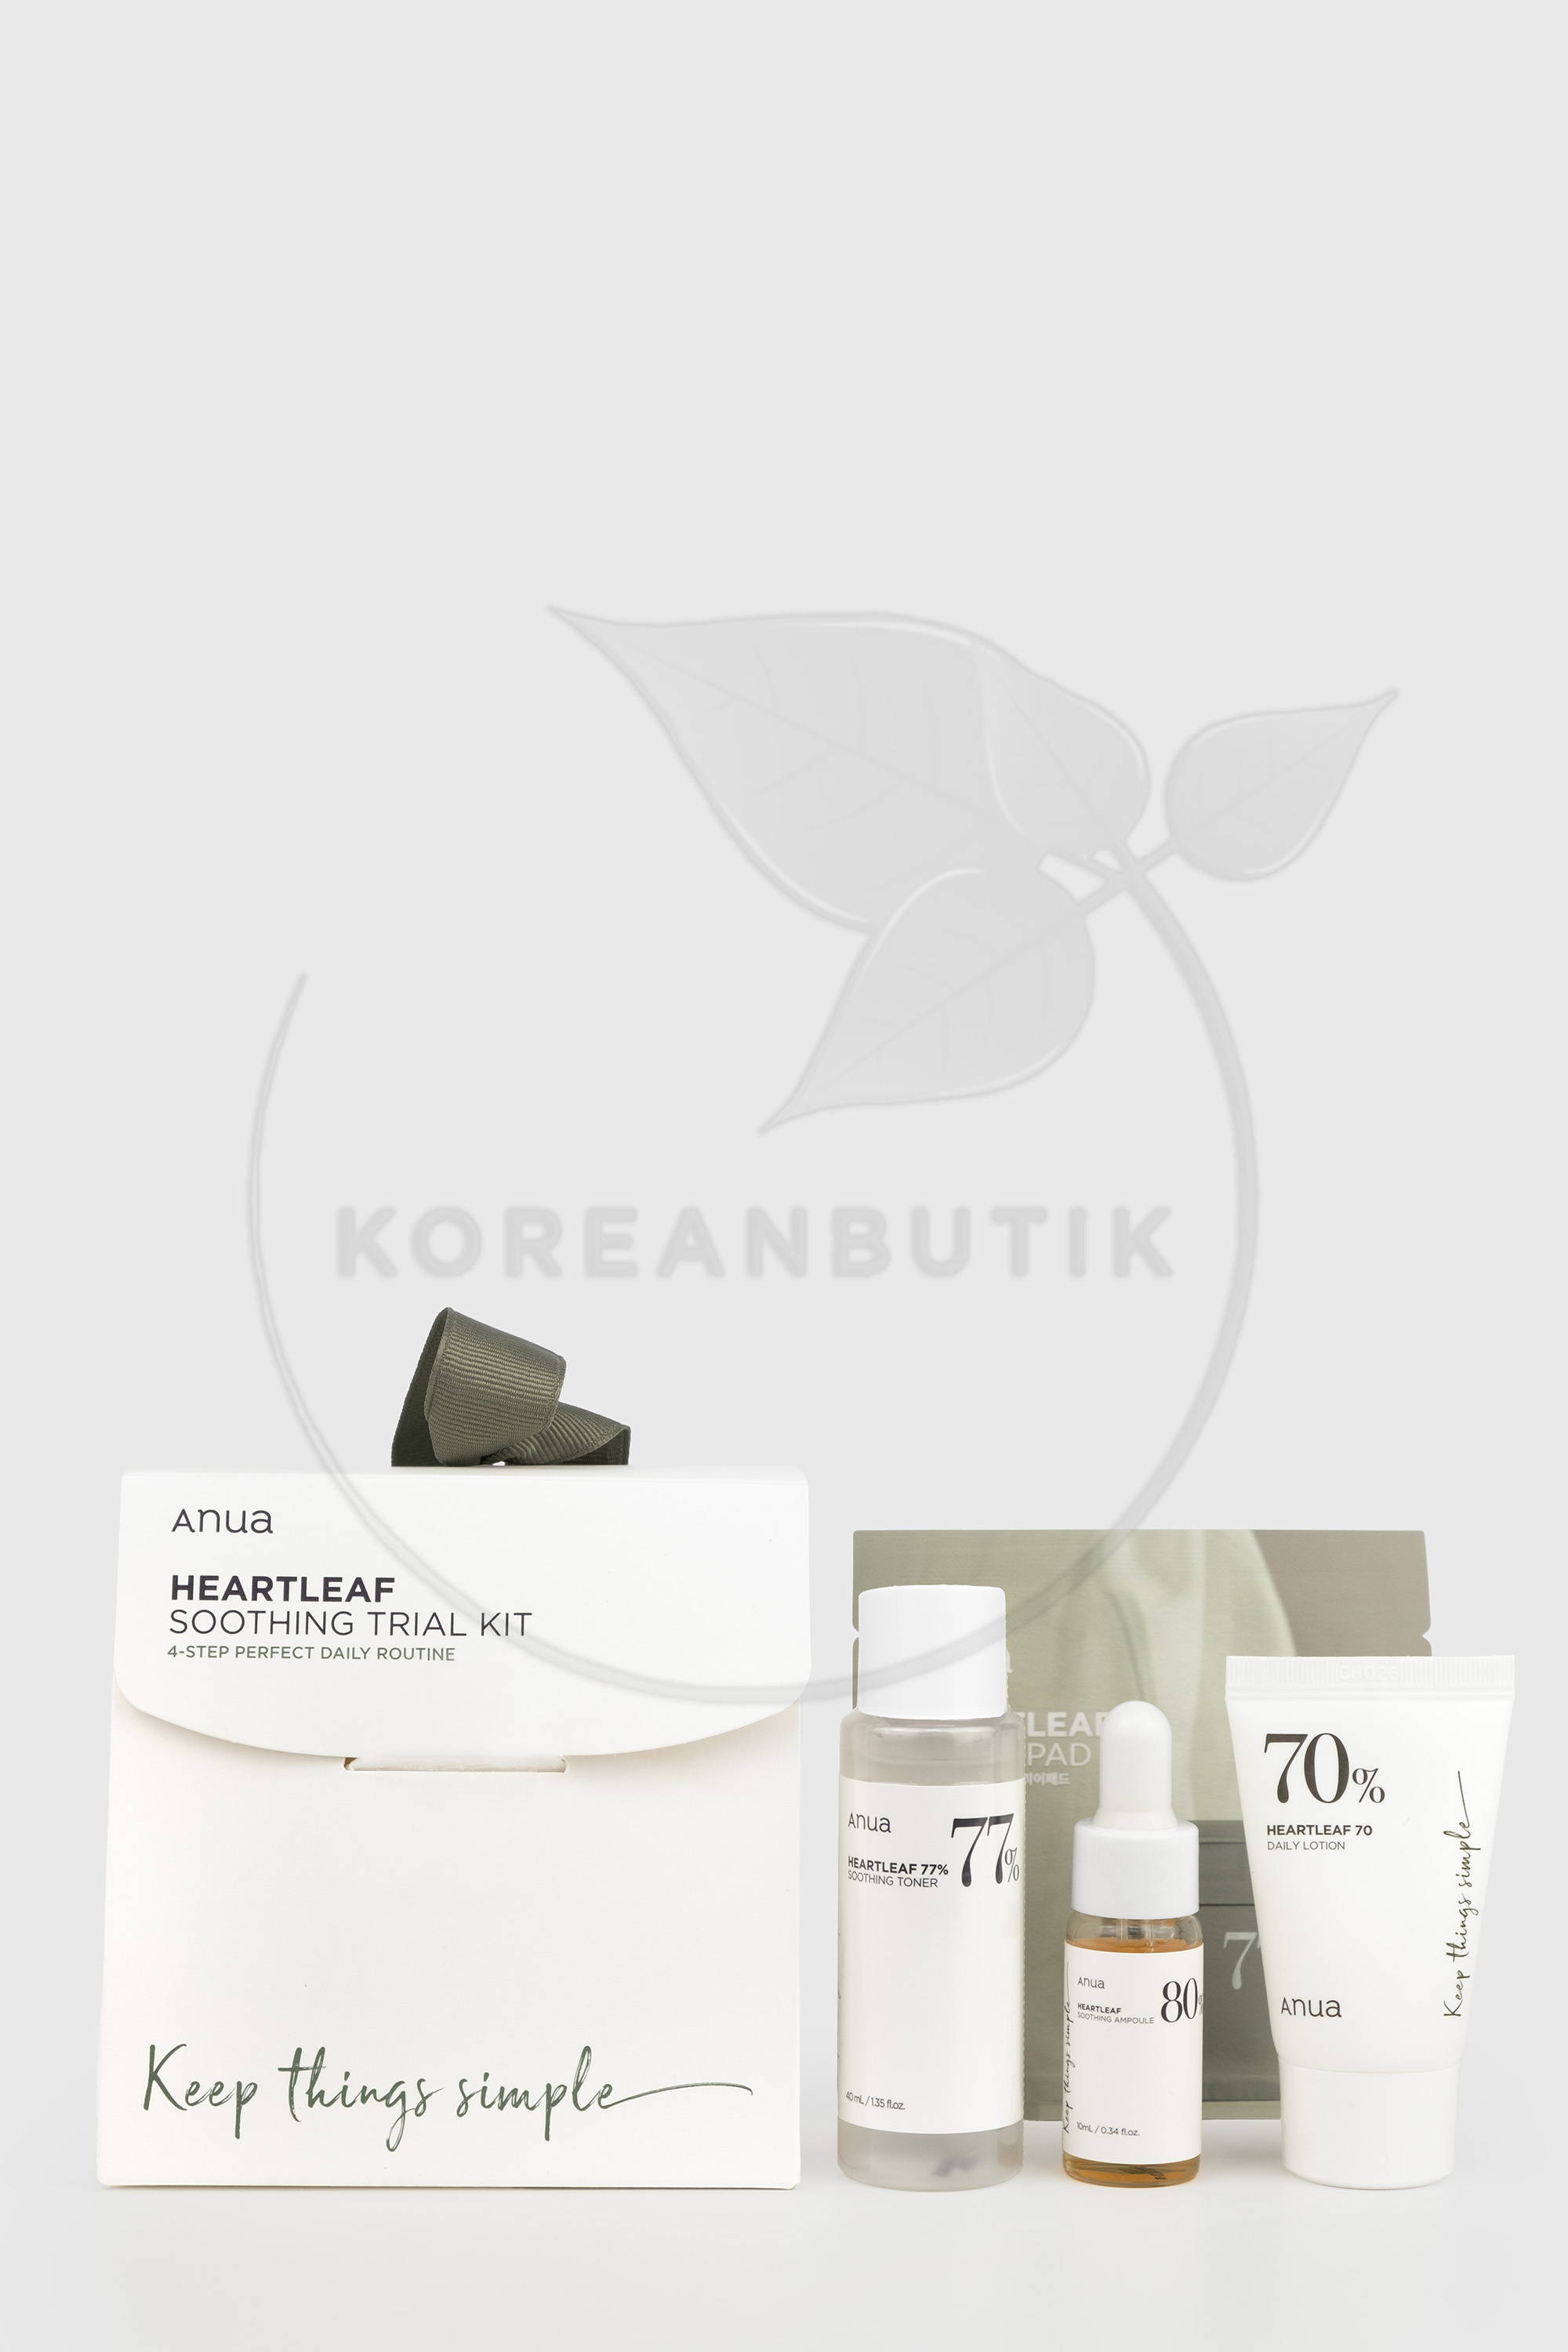  Anua Heartleaf Soothing Trial Kit..